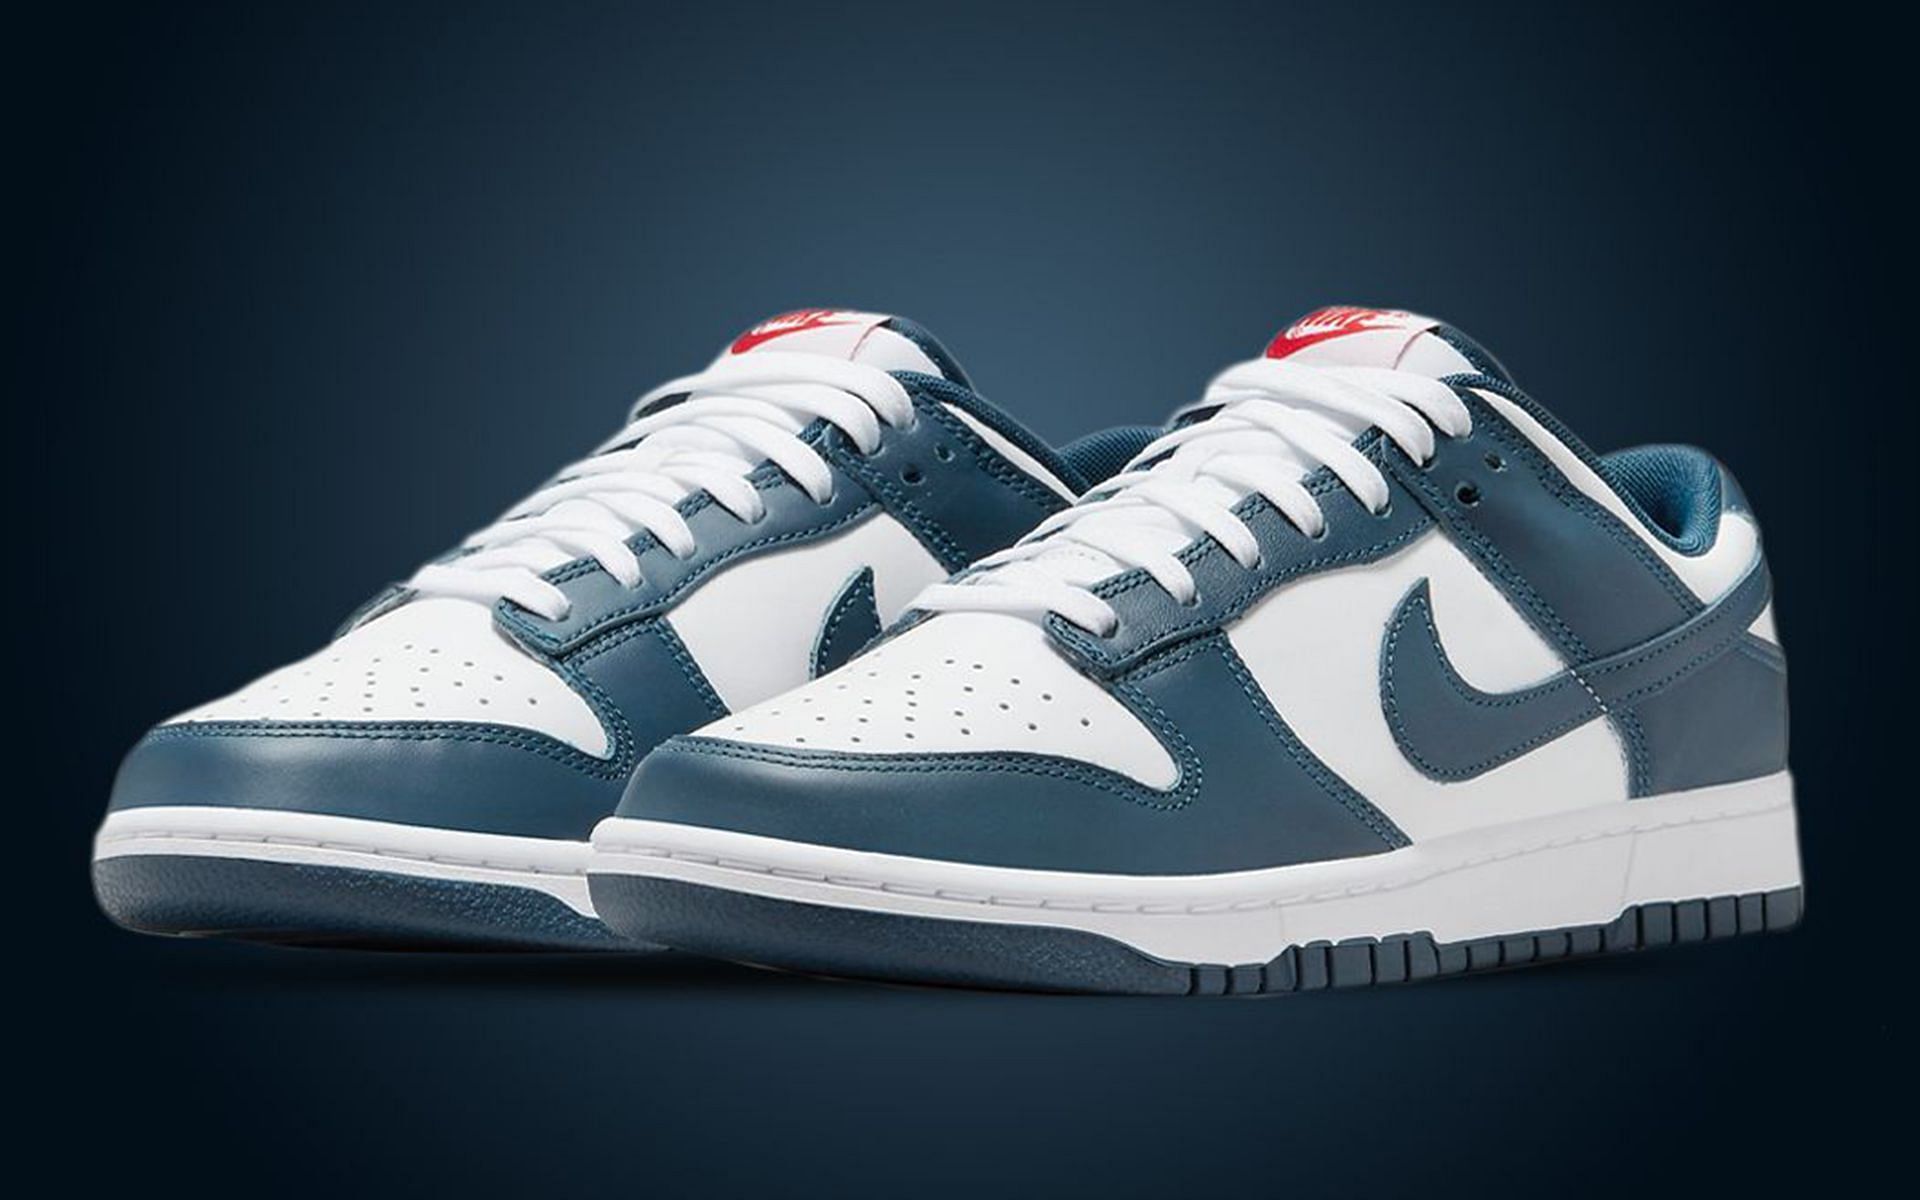 Where to buy Nike Dunk Low Valerian Blue shoes? Price, release date and